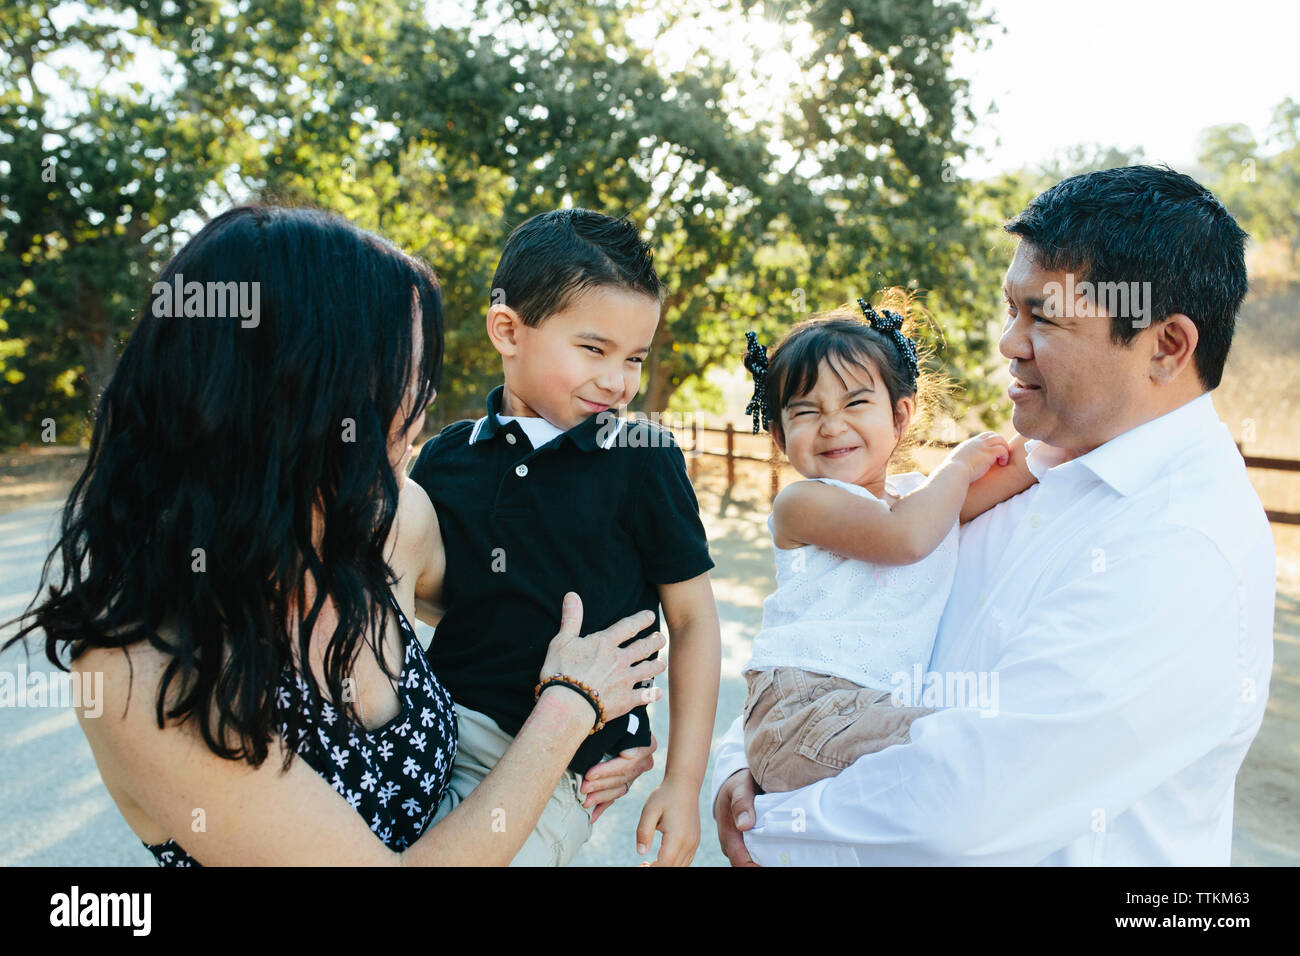 Happy parents carrying cute children making faces while standing on road against trees in park Stock Photo